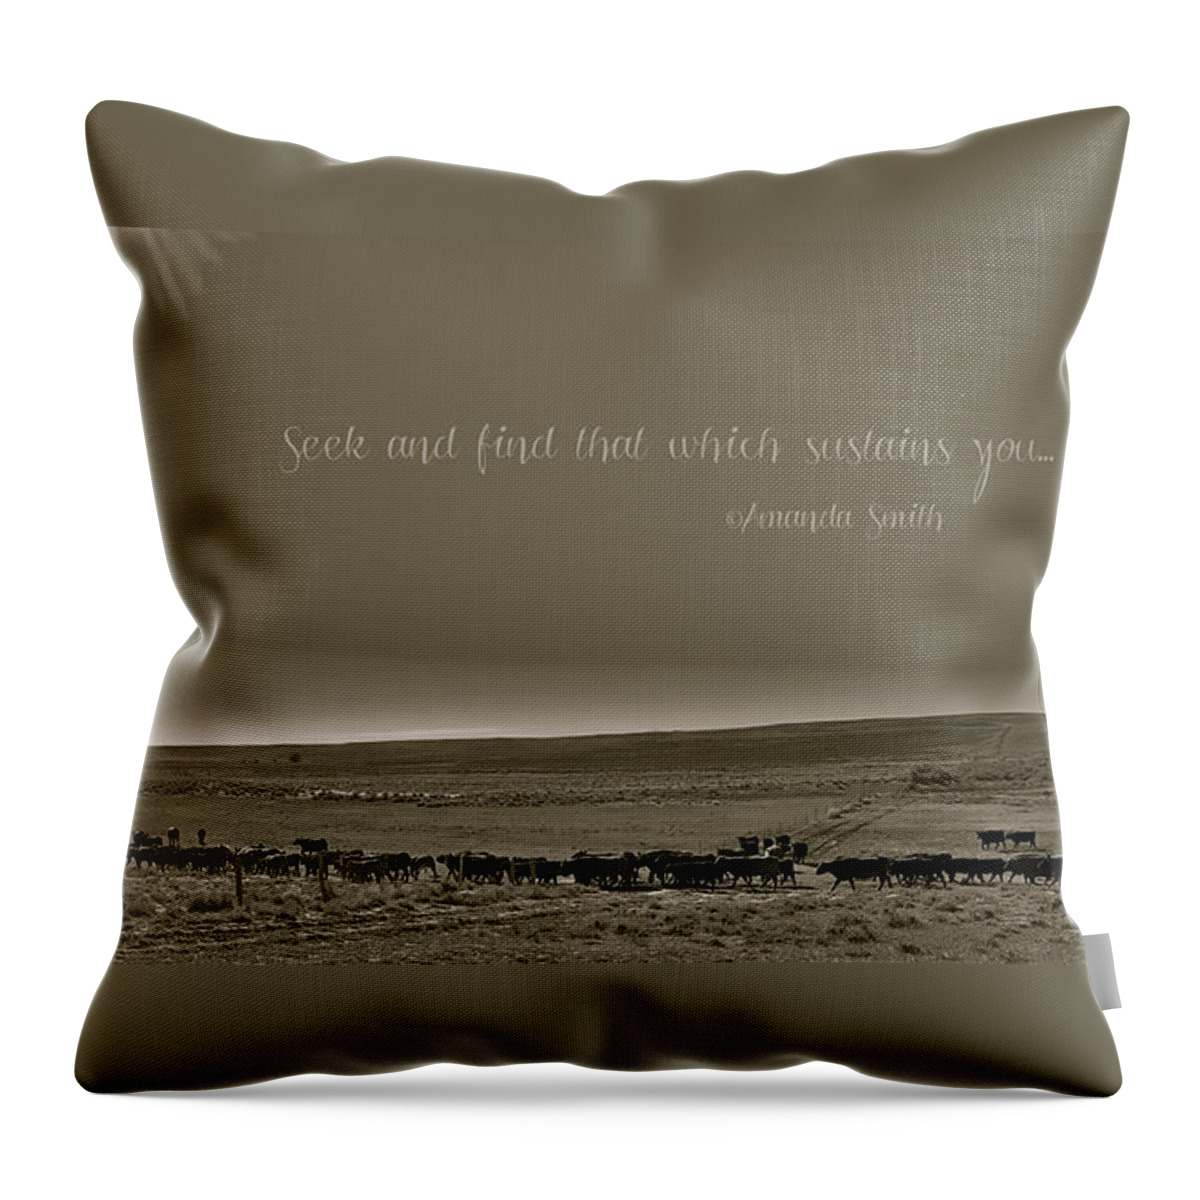 Cattle Throw Pillow featuring the photograph Seek and Find by Amanda Smith